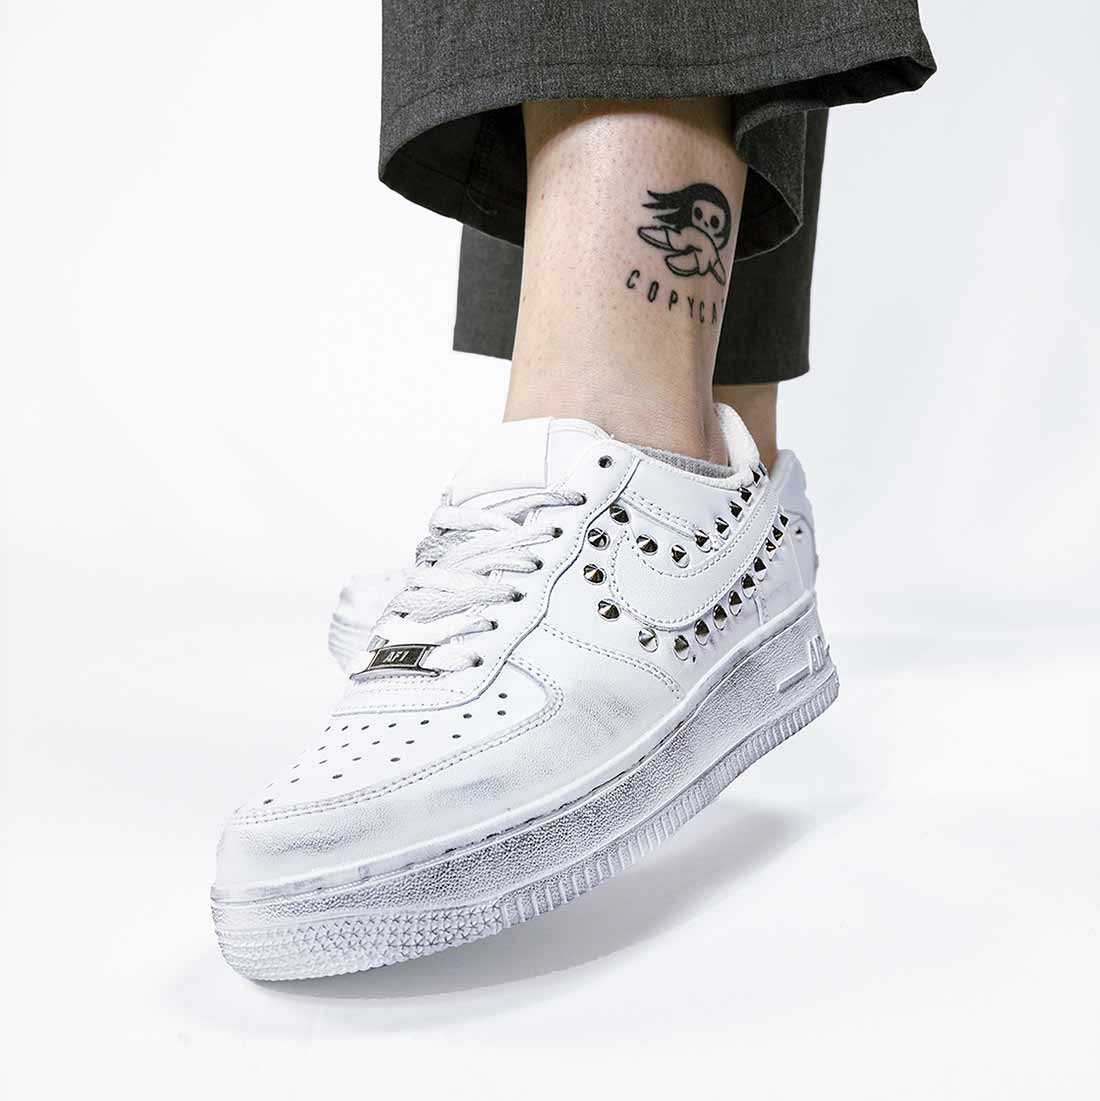 Nike air force one con borchie argento ed effetto sporco